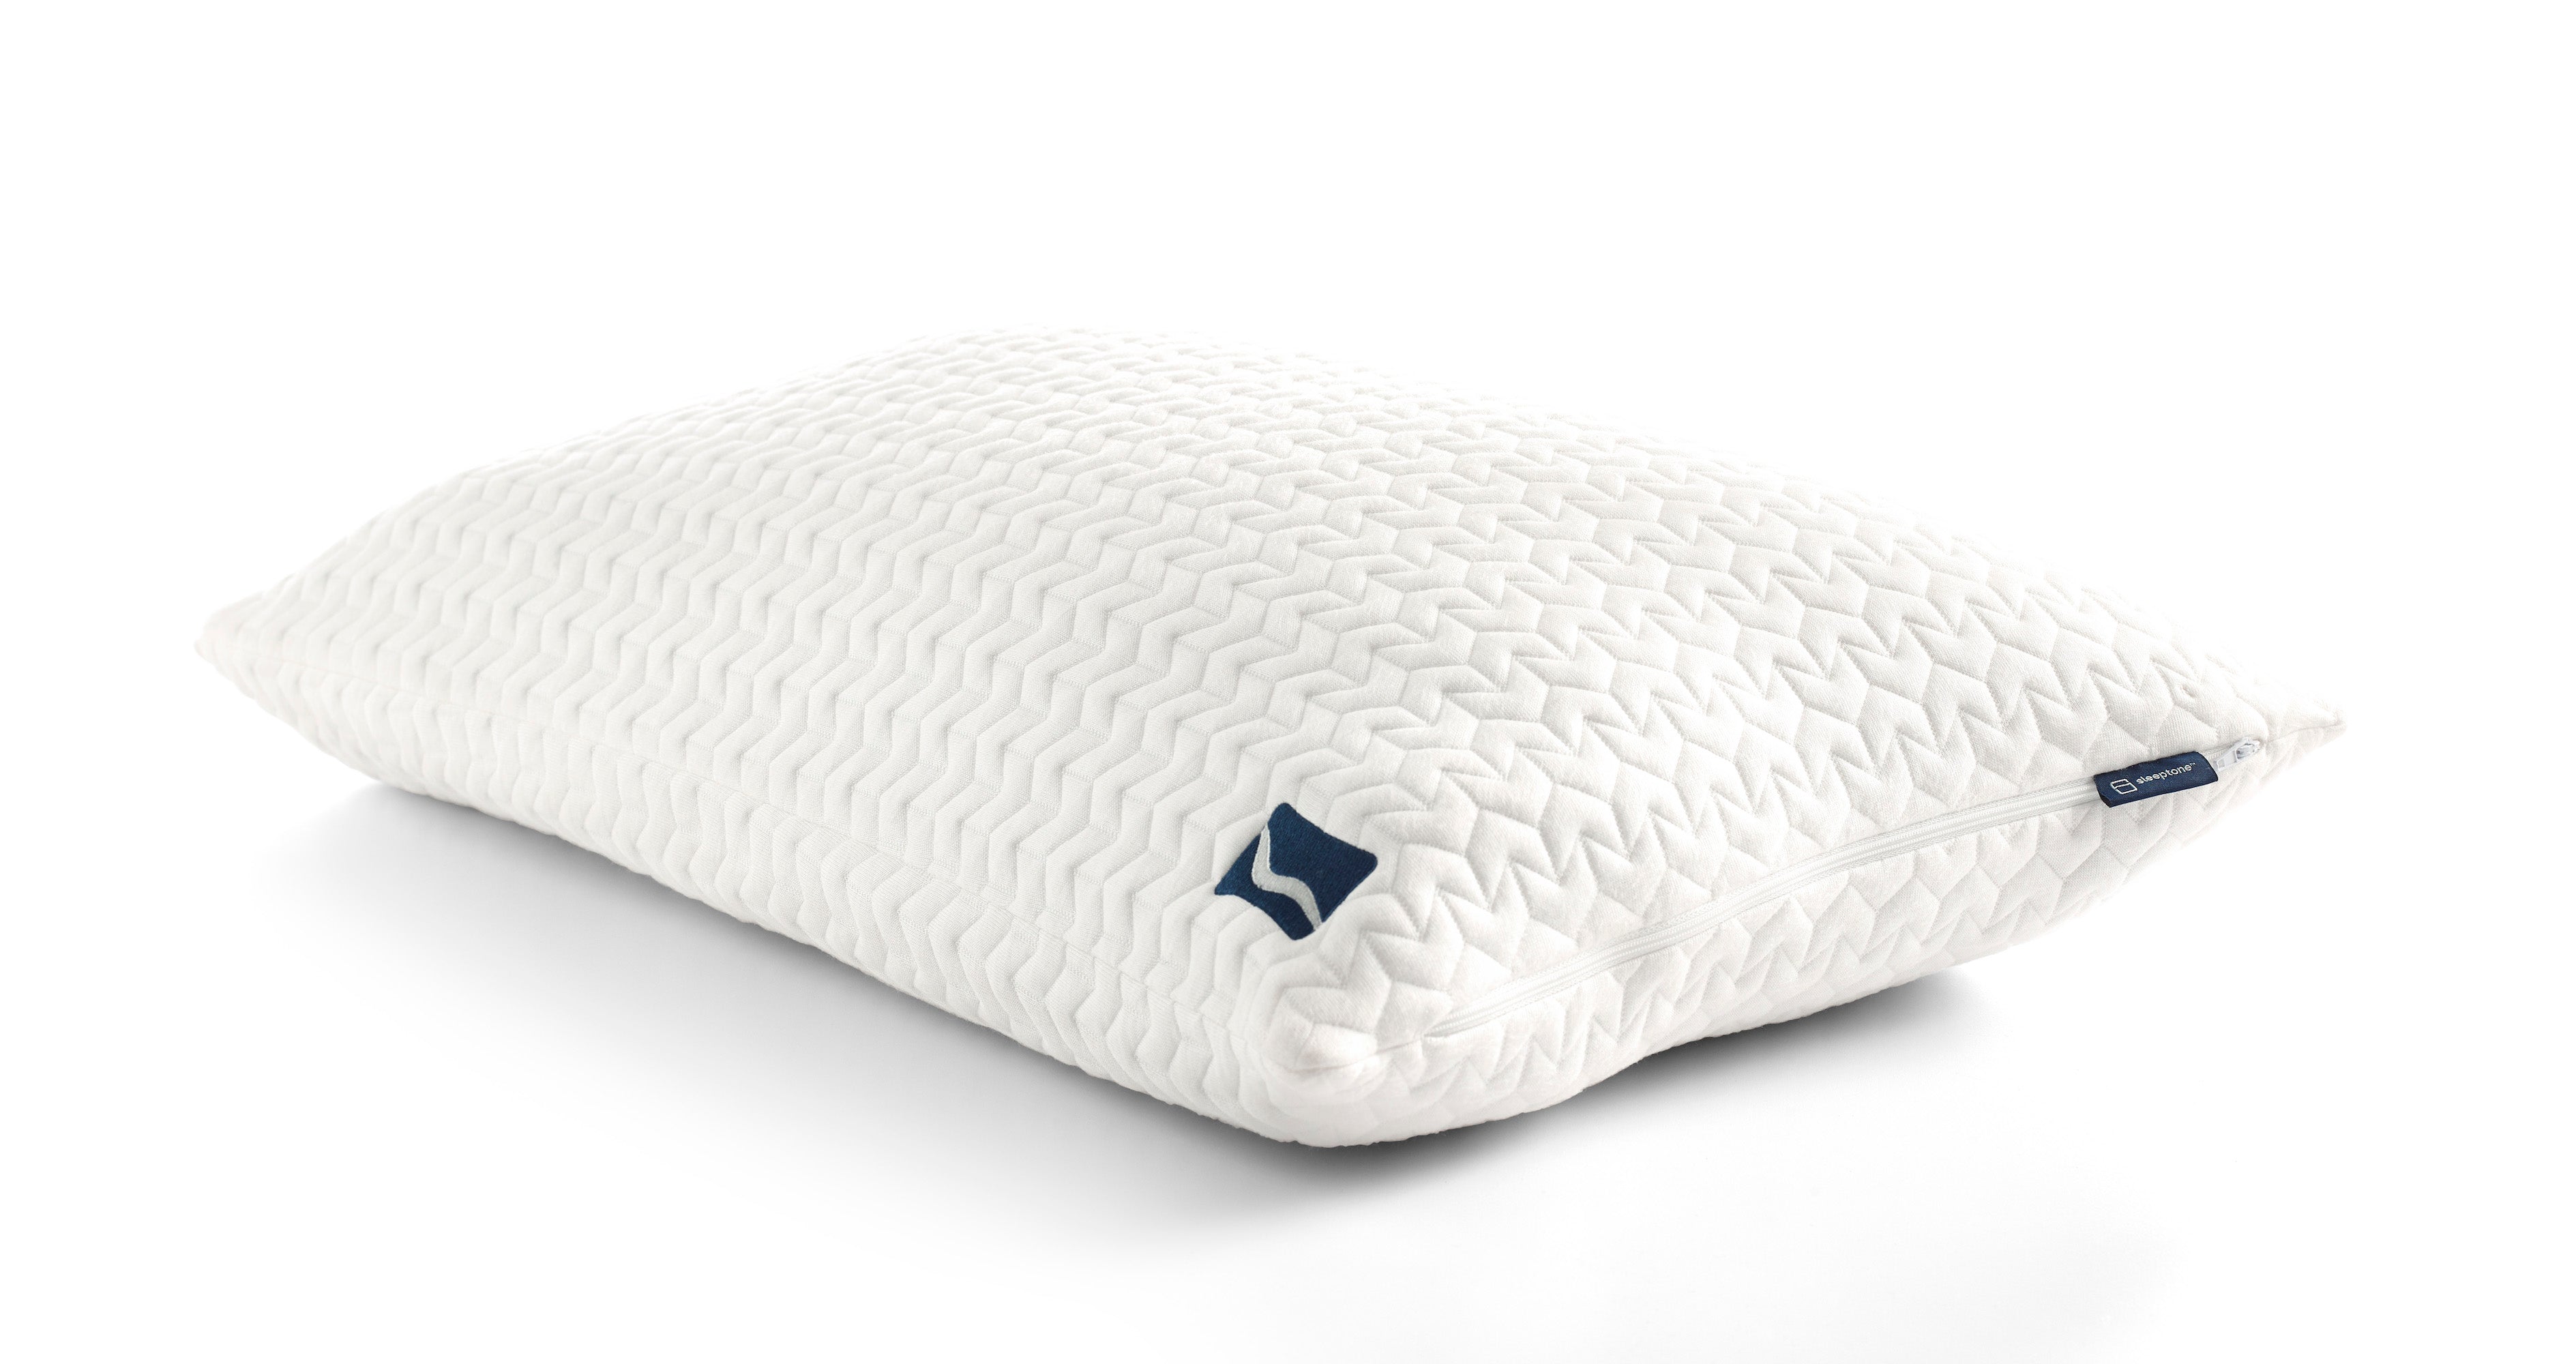 Adjustable Bed Pillow